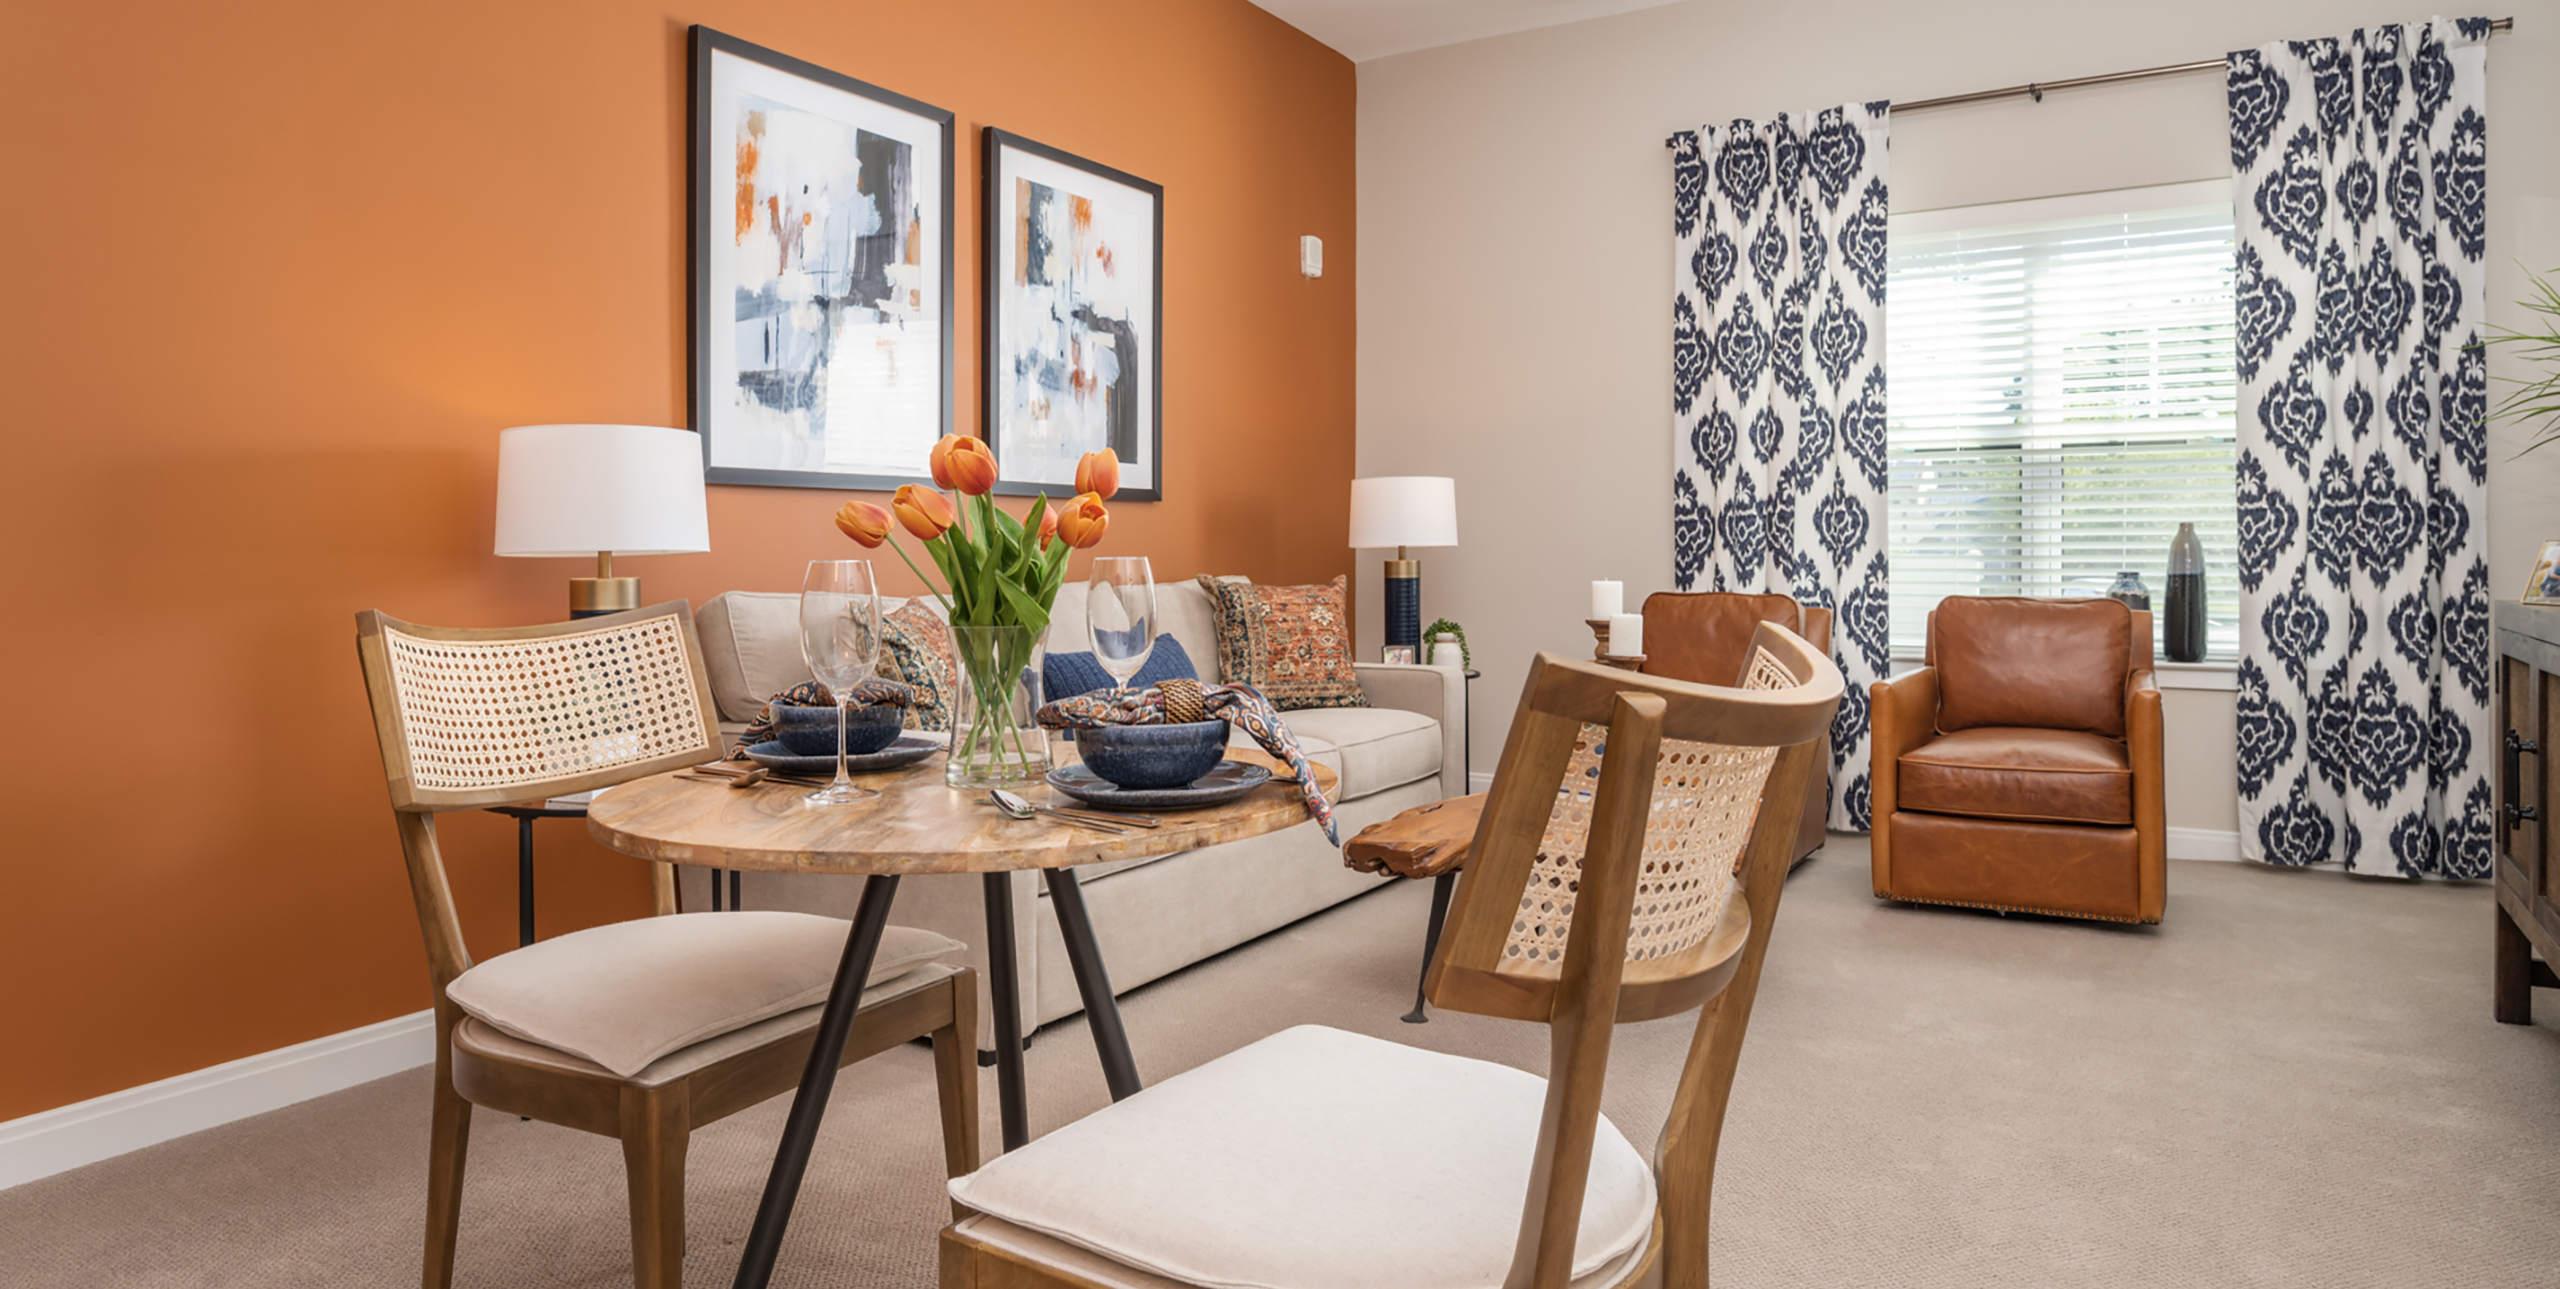 Living room area with dining table and two chairsinside an apartment at Brightview Senior Living Port Jeff